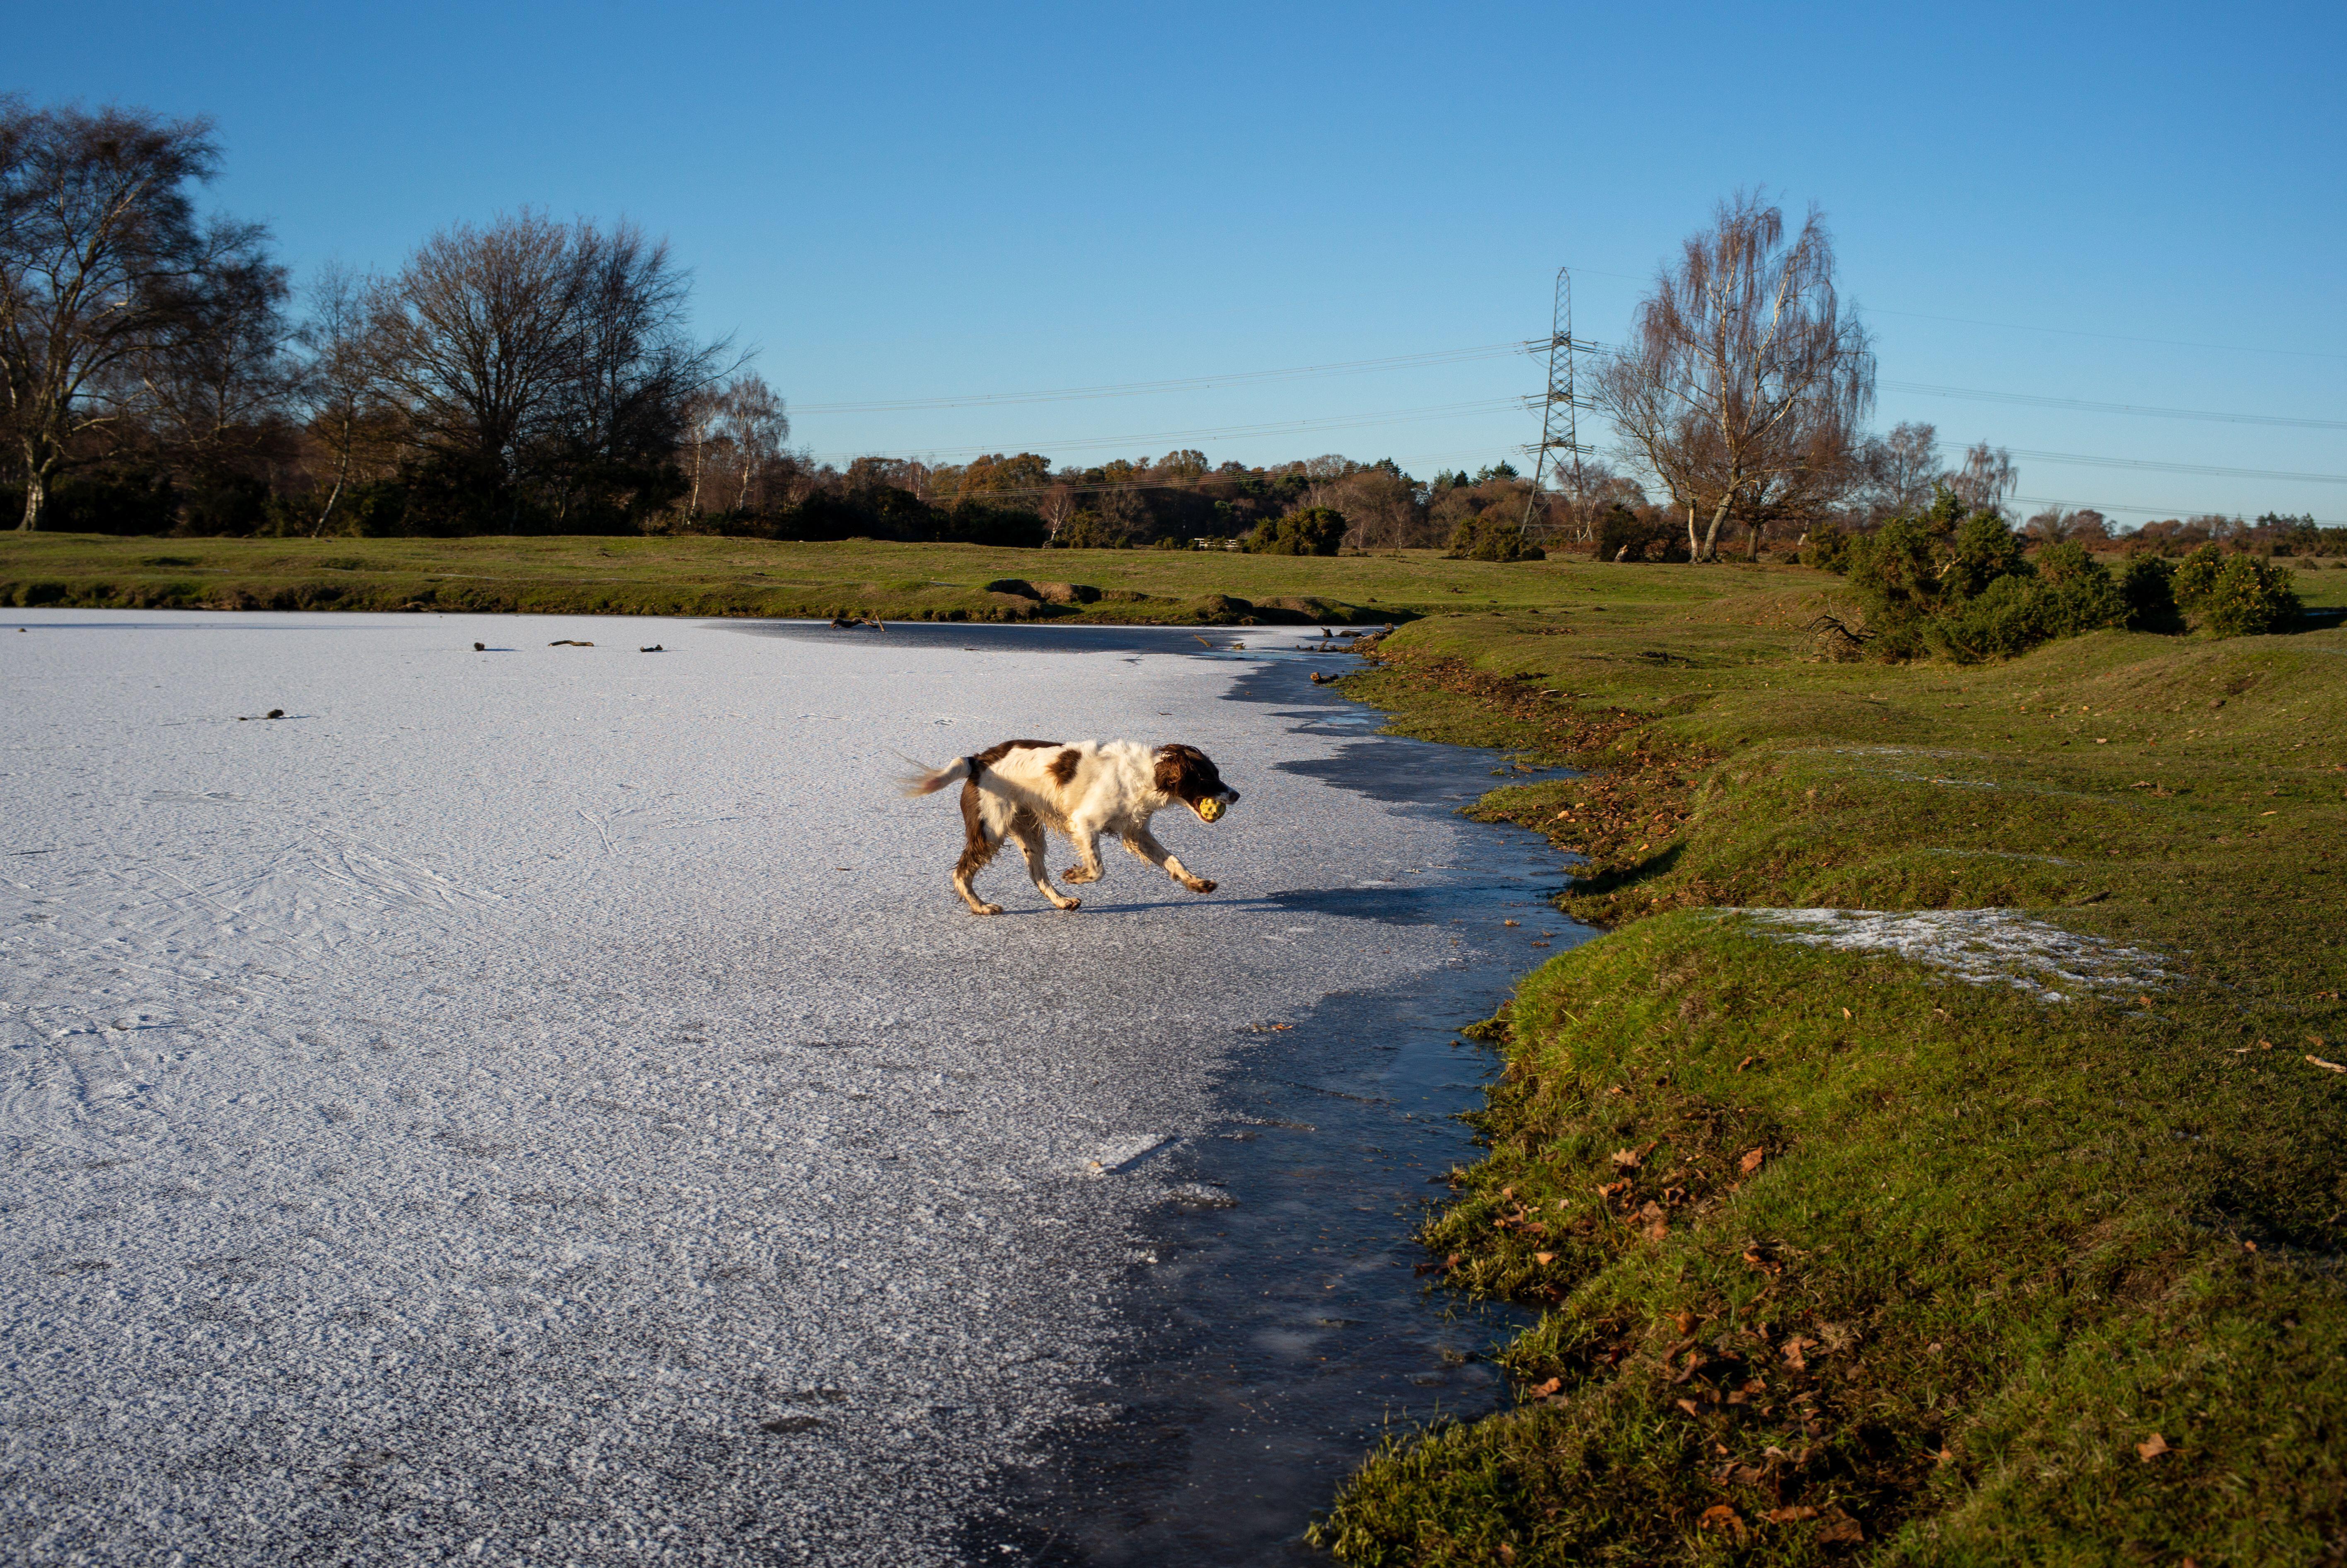 A English springer spaniel runs across the frozen ice of Sturtmoor Pond situated in the Plaitford Common just outside The New Forest UK.